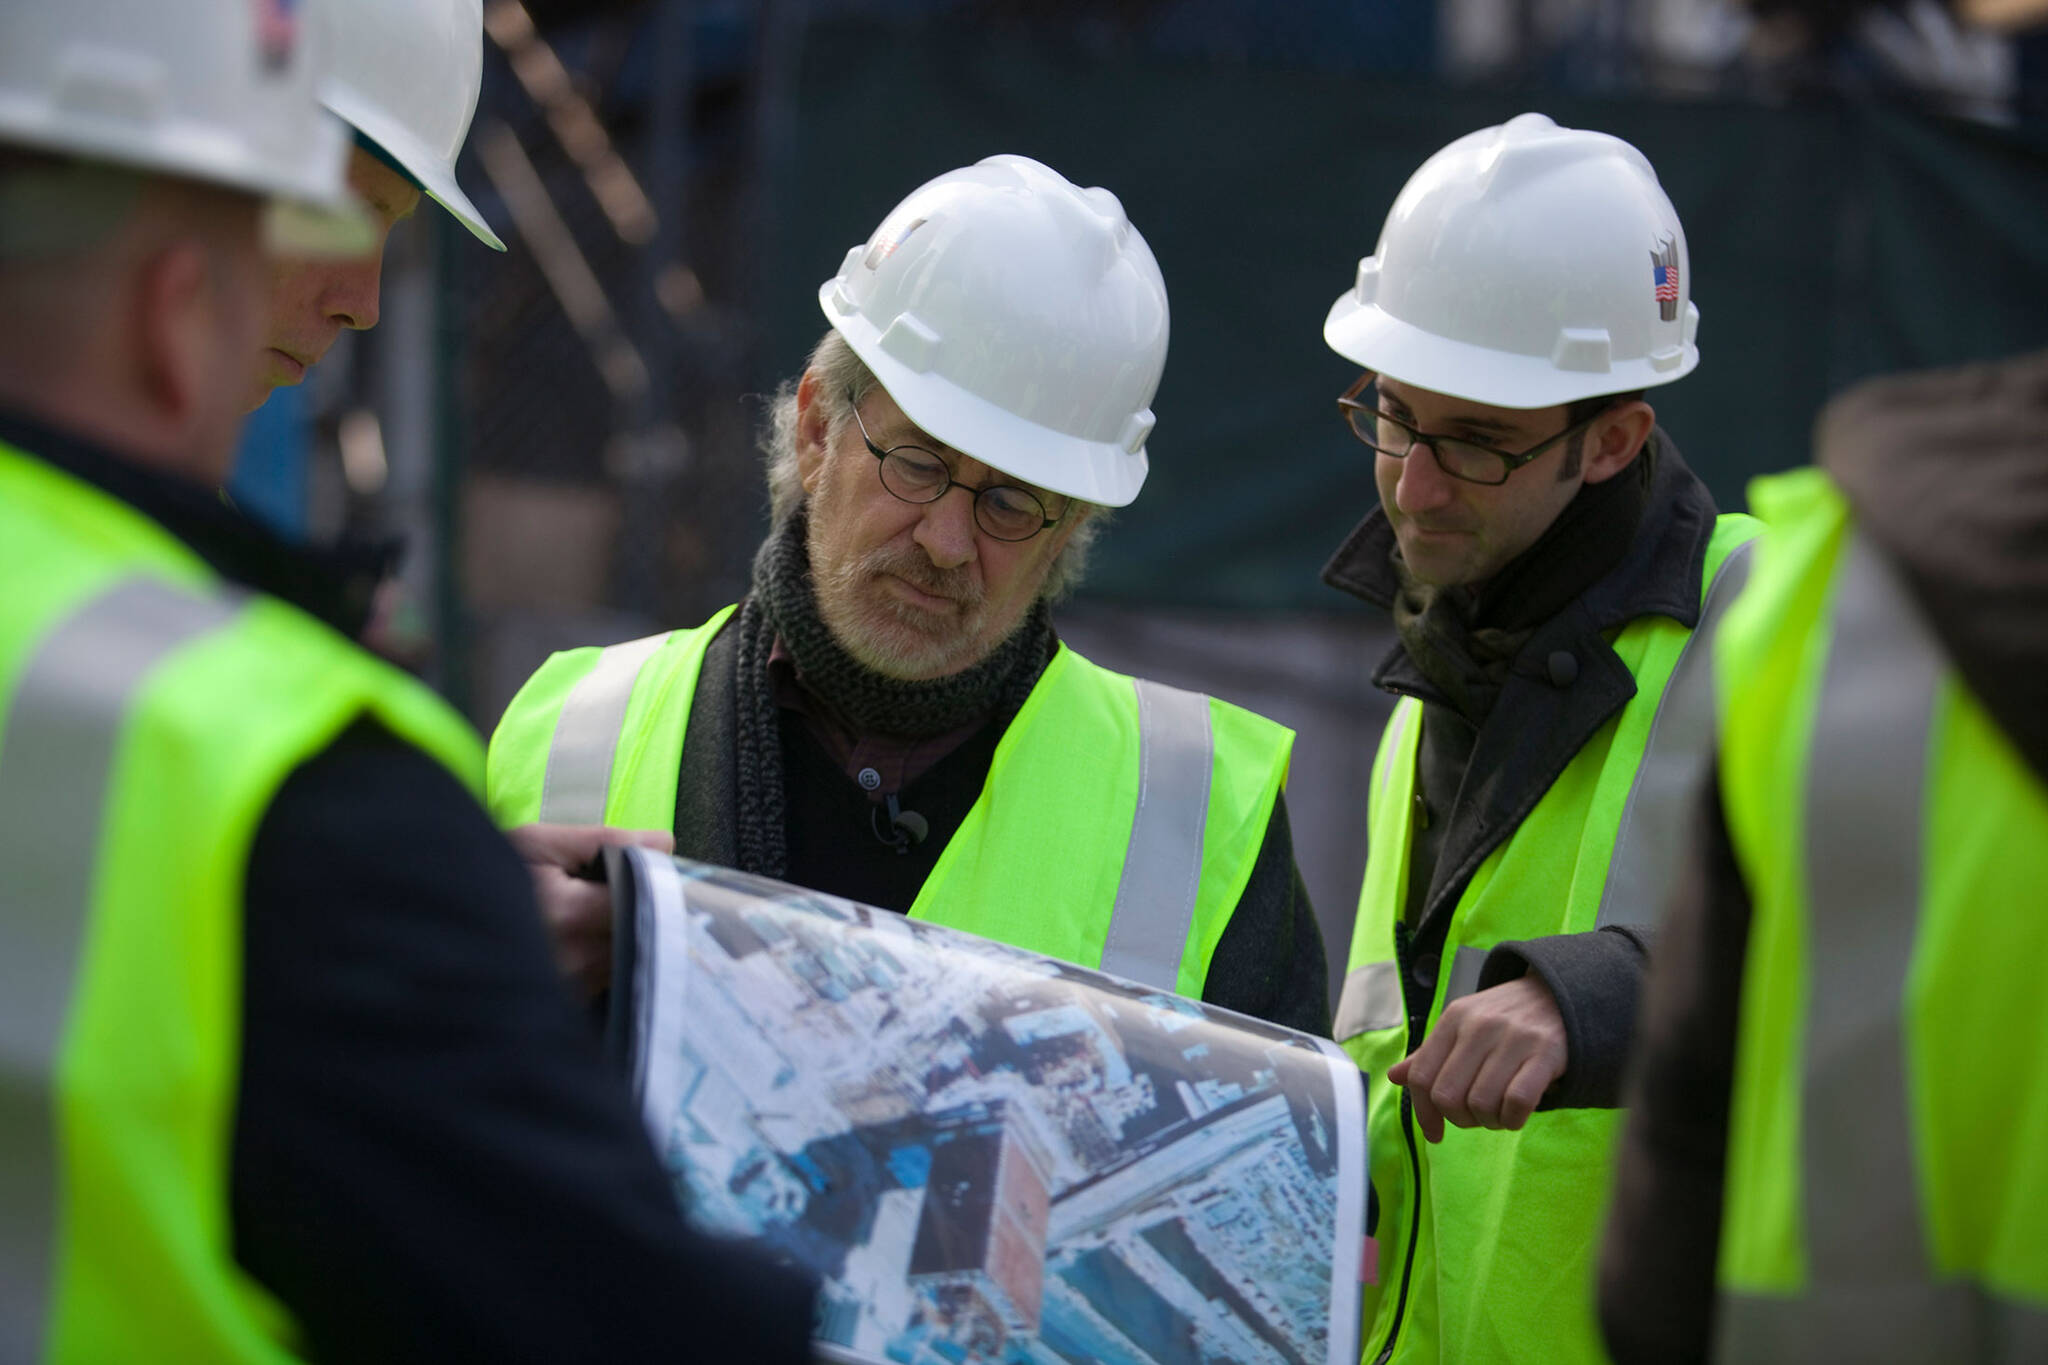 Danny Forster and Steven Spielberg on Ground Zero for the Rising: Rebuilding Ground Zero documentary Co-produced by Danny Forster and Steven Spielberg about the rebuilding of the World Trade Center site in the wake of 9/11.